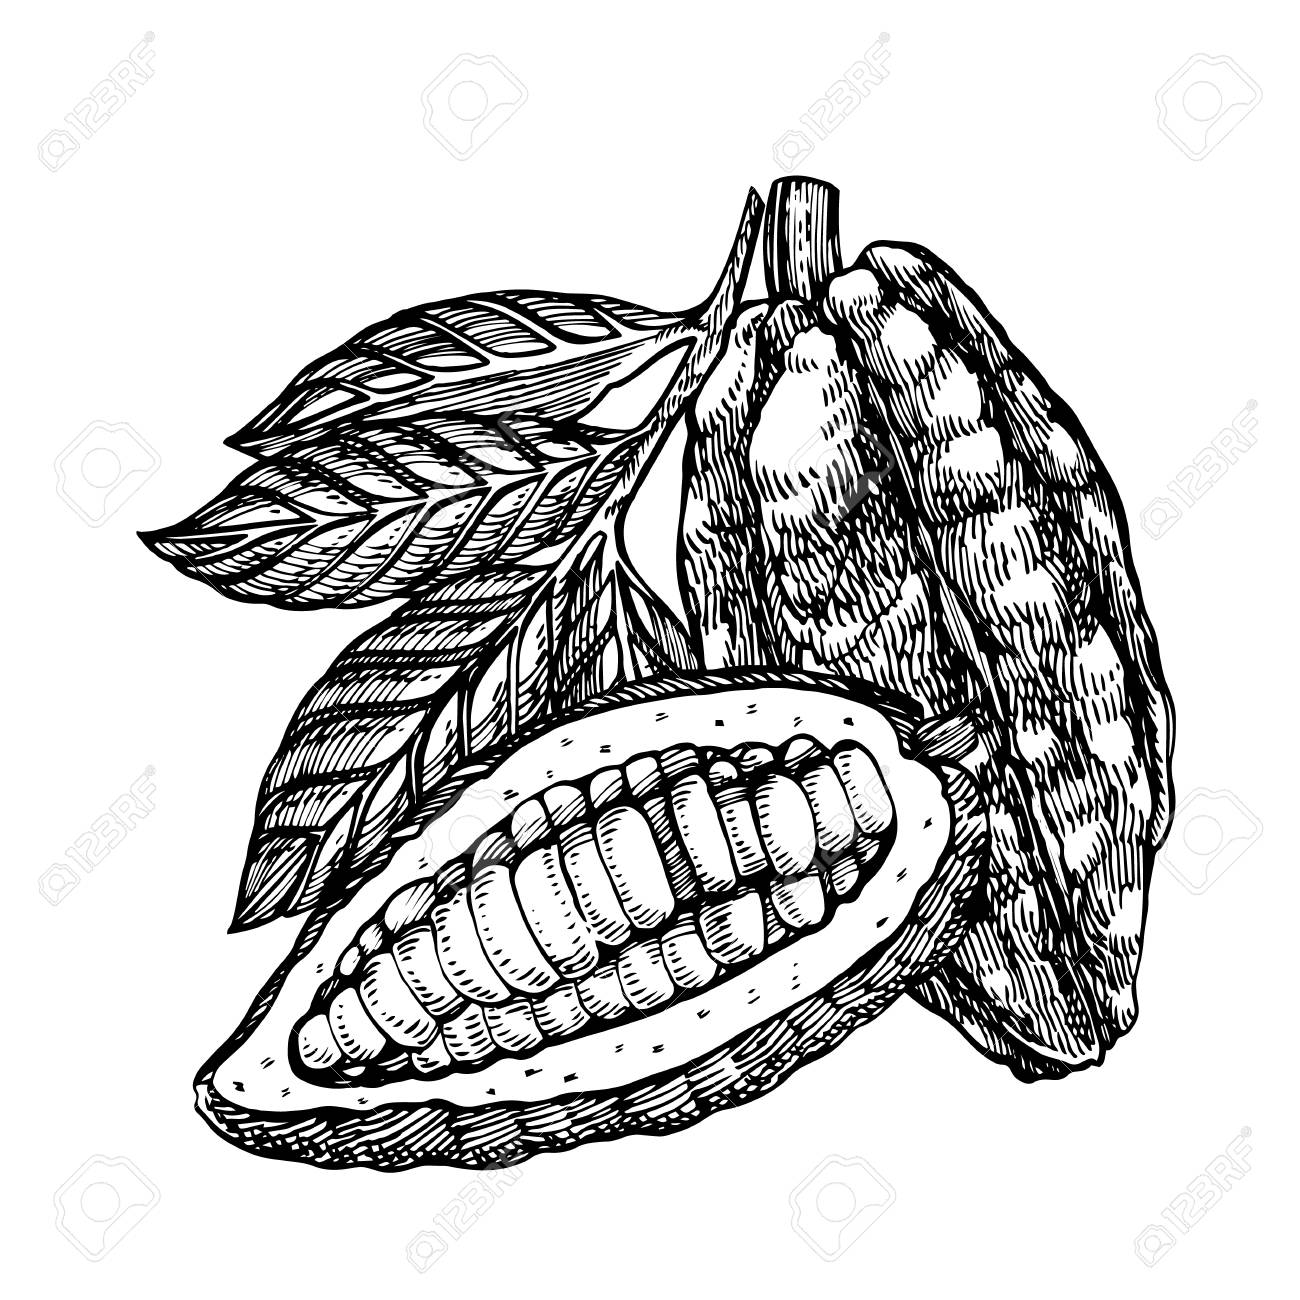 Chicago drawing at getdrawings. Bean clipart winged bean